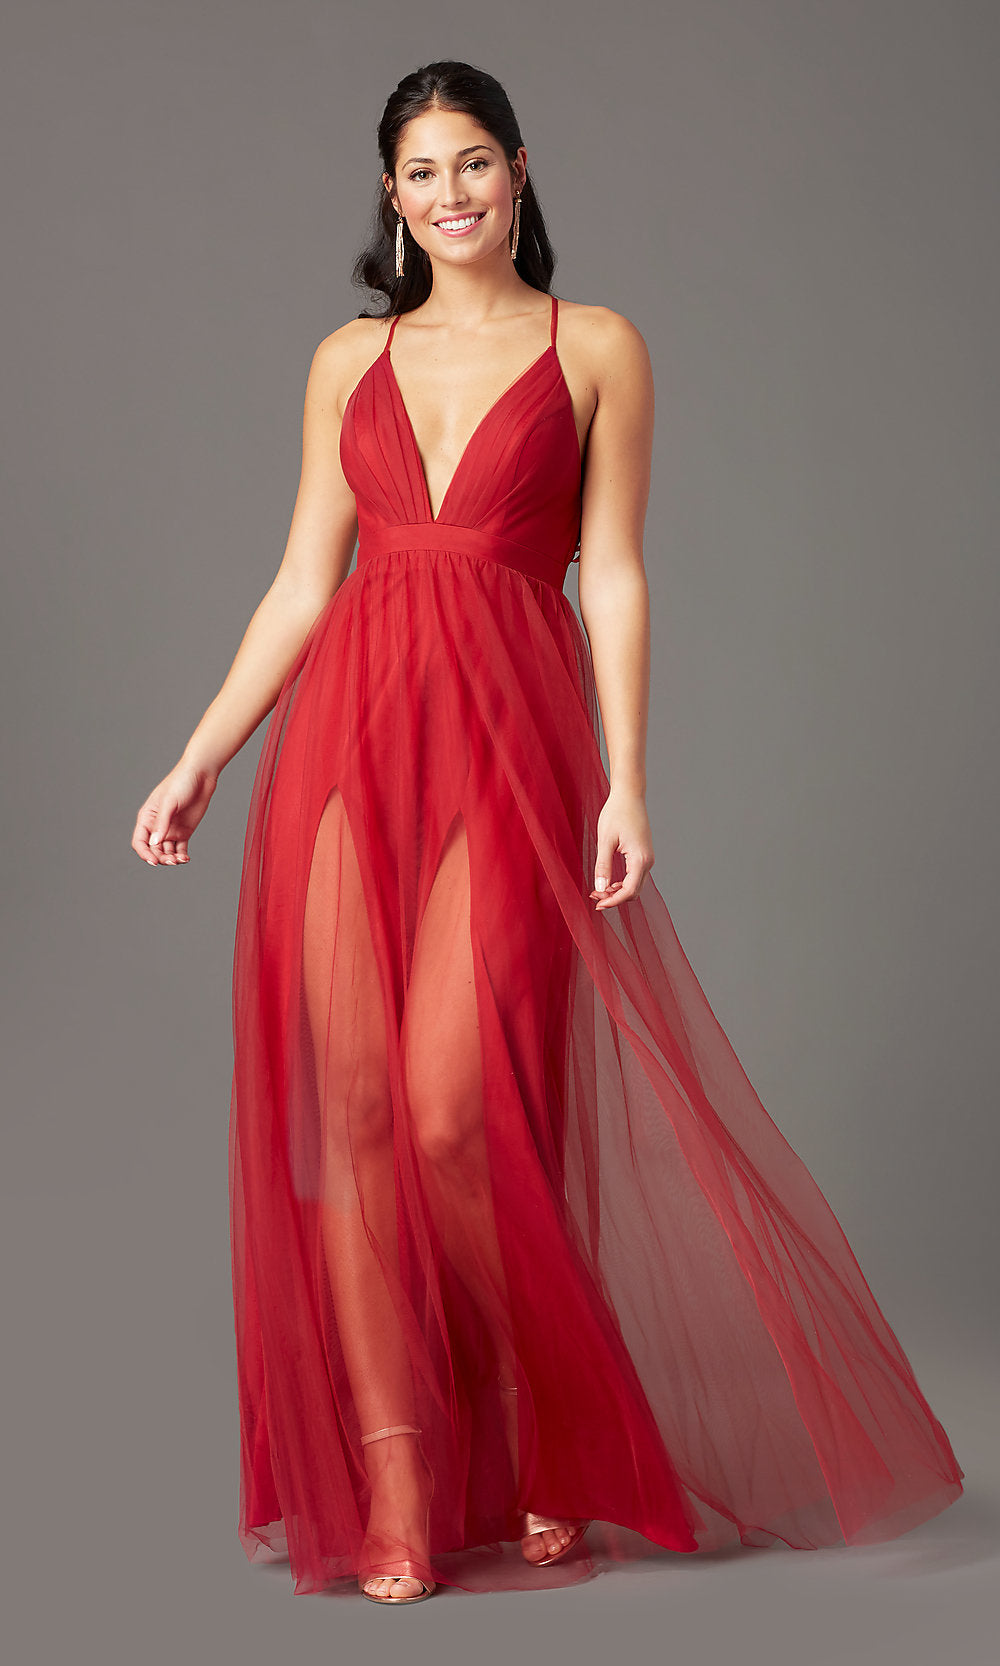  Chianti Red Long Formal Prom Dress by PromGirl